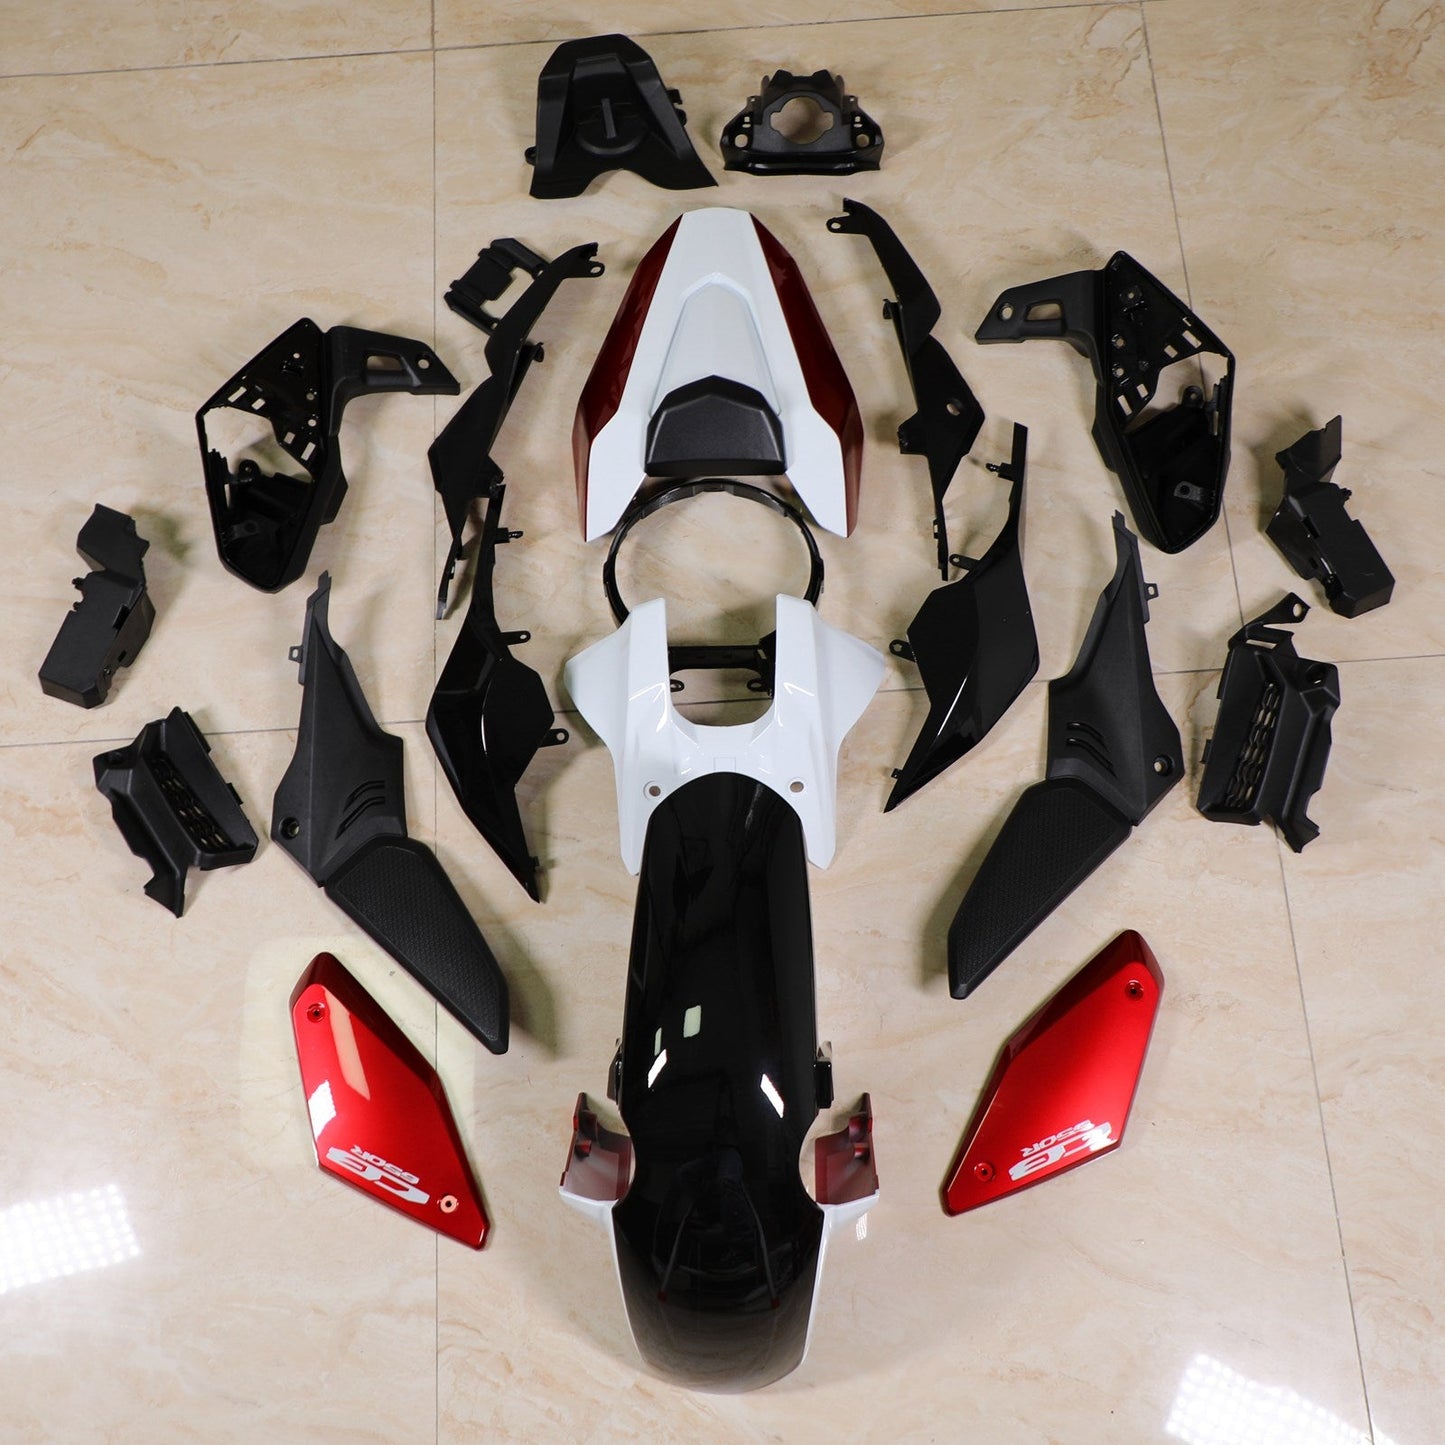 2019-2021 Honda CB 650R Amotopart ABS Plastic Injection Molding Fairing Fit Black Red